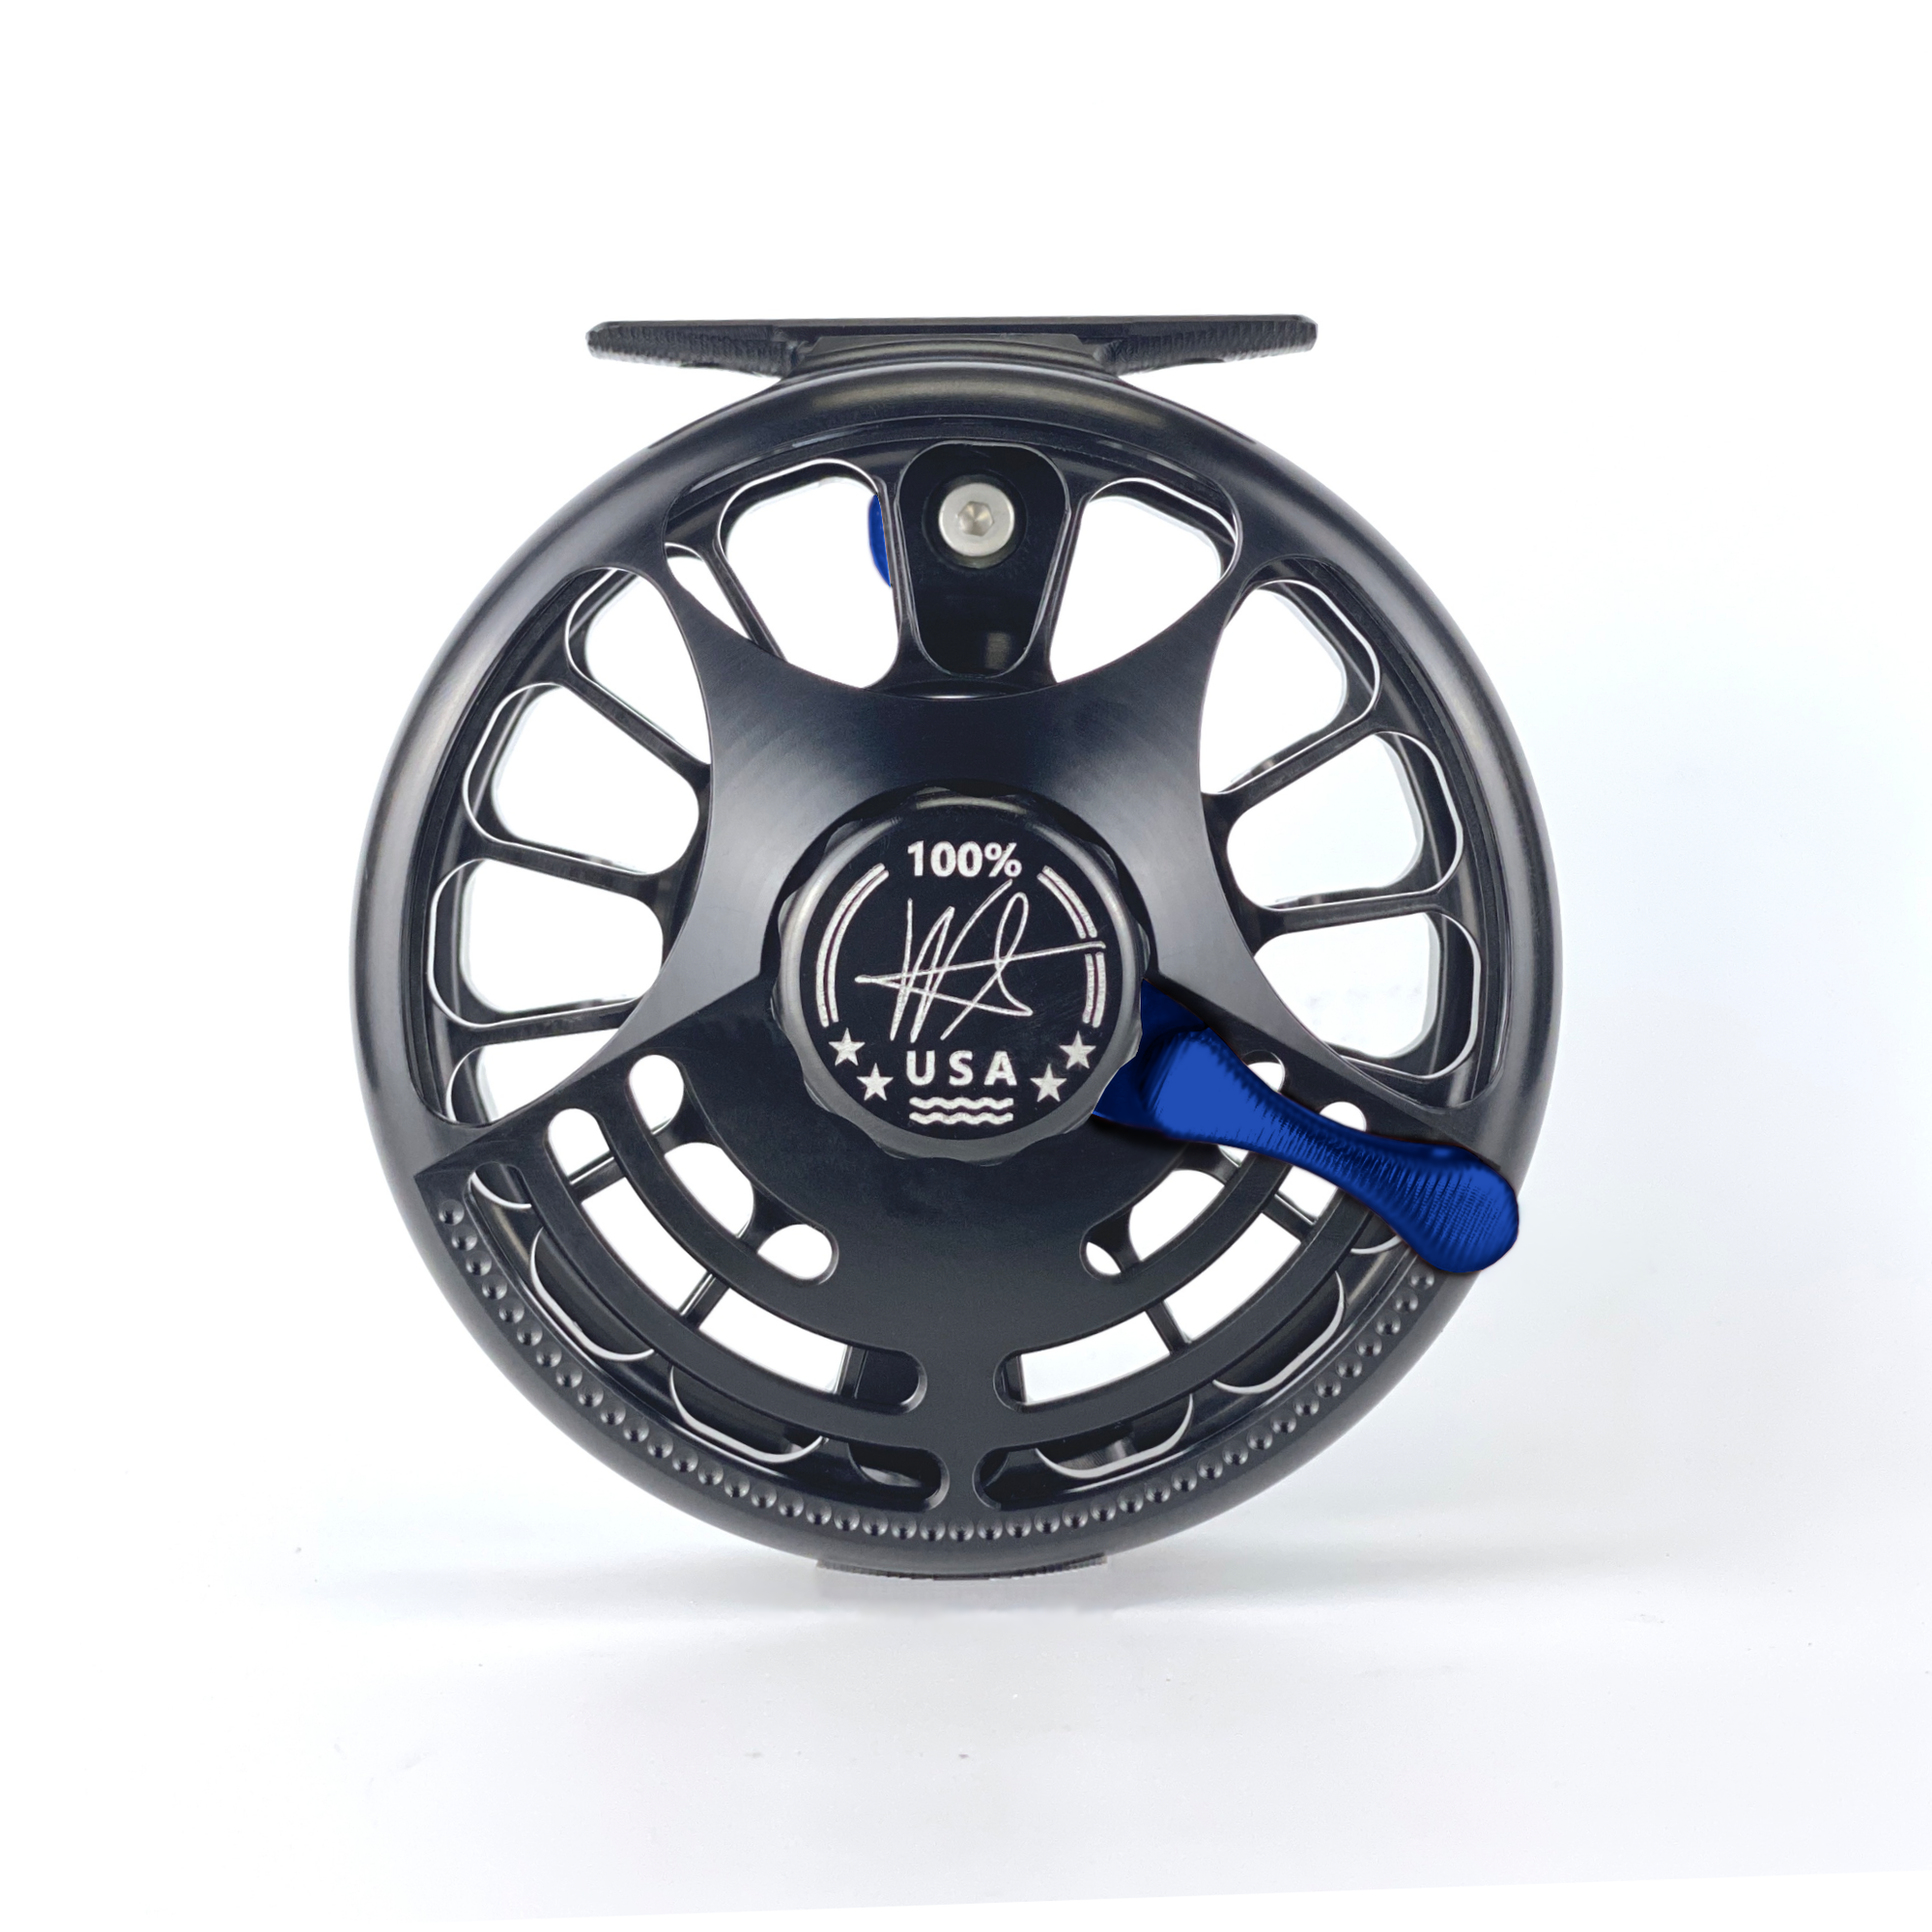 SF 6-9wt Fly Reel with Distinctive Accent Color Lever - A Symbol of High Performance and Expertise in the Fishing Community.